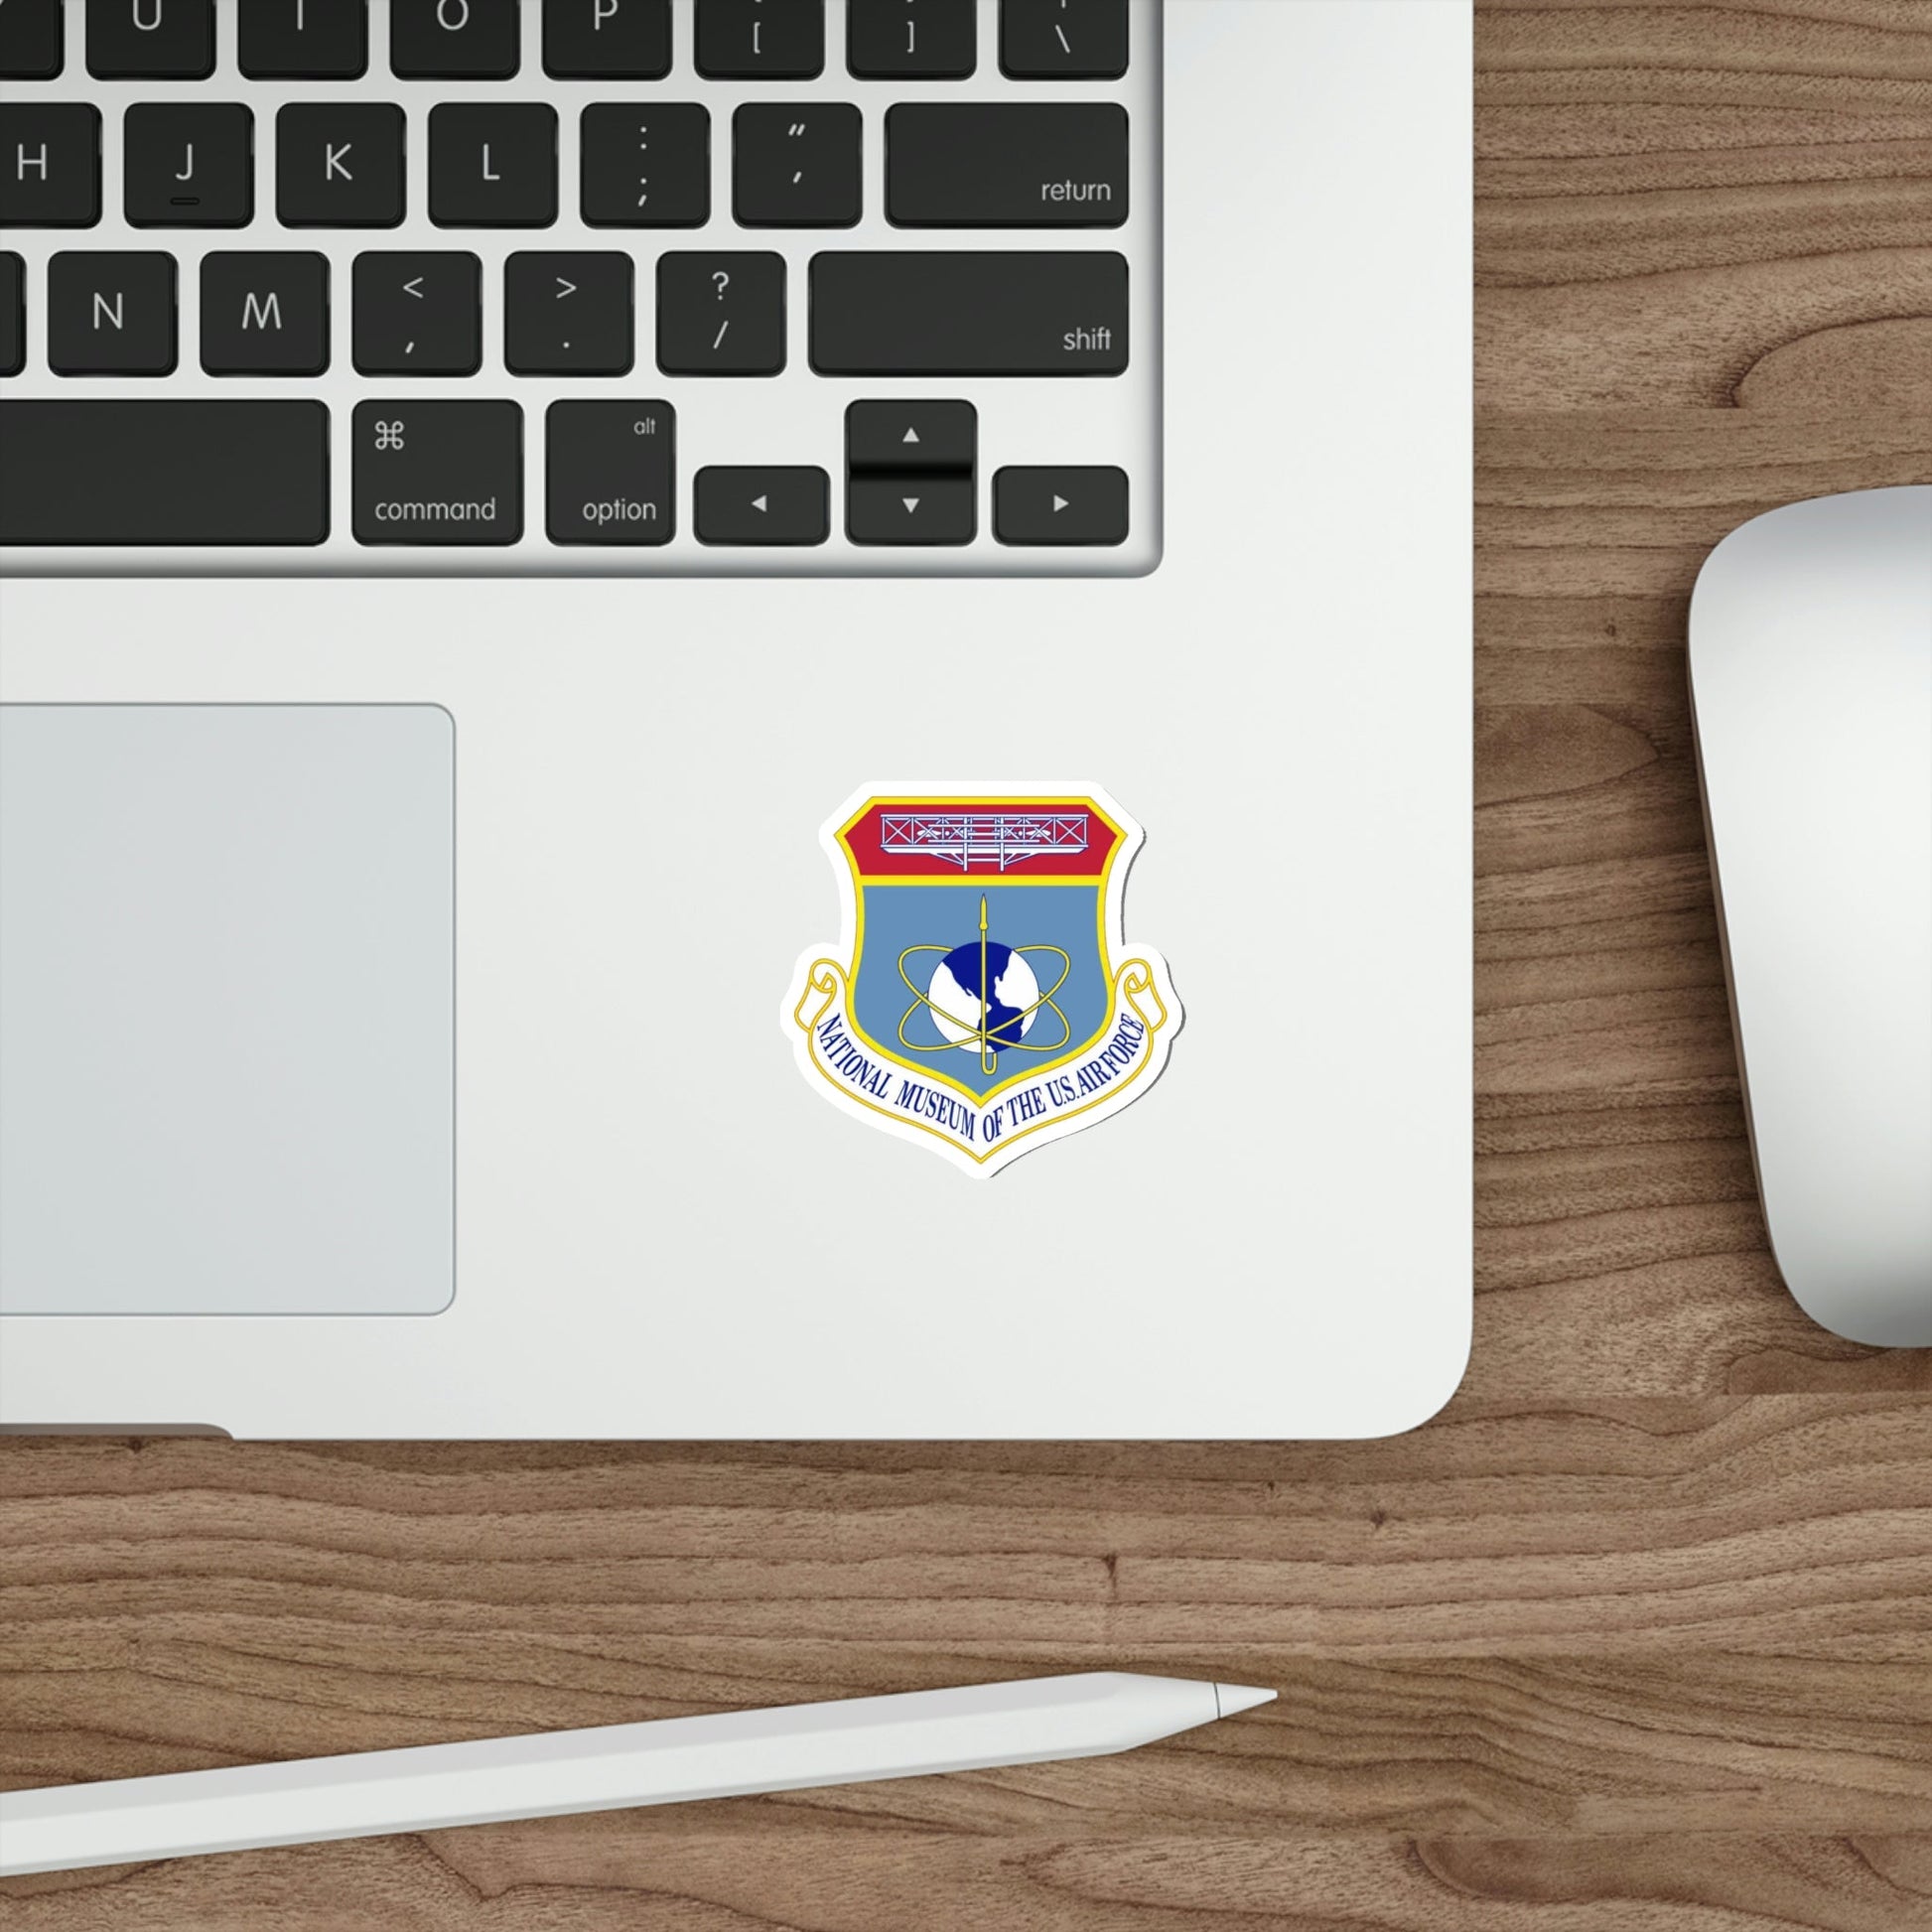 National Museum of the U.S. Air Force (U.S. Air Force) STICKER Vinyl Die-Cut Decal-The Sticker Space